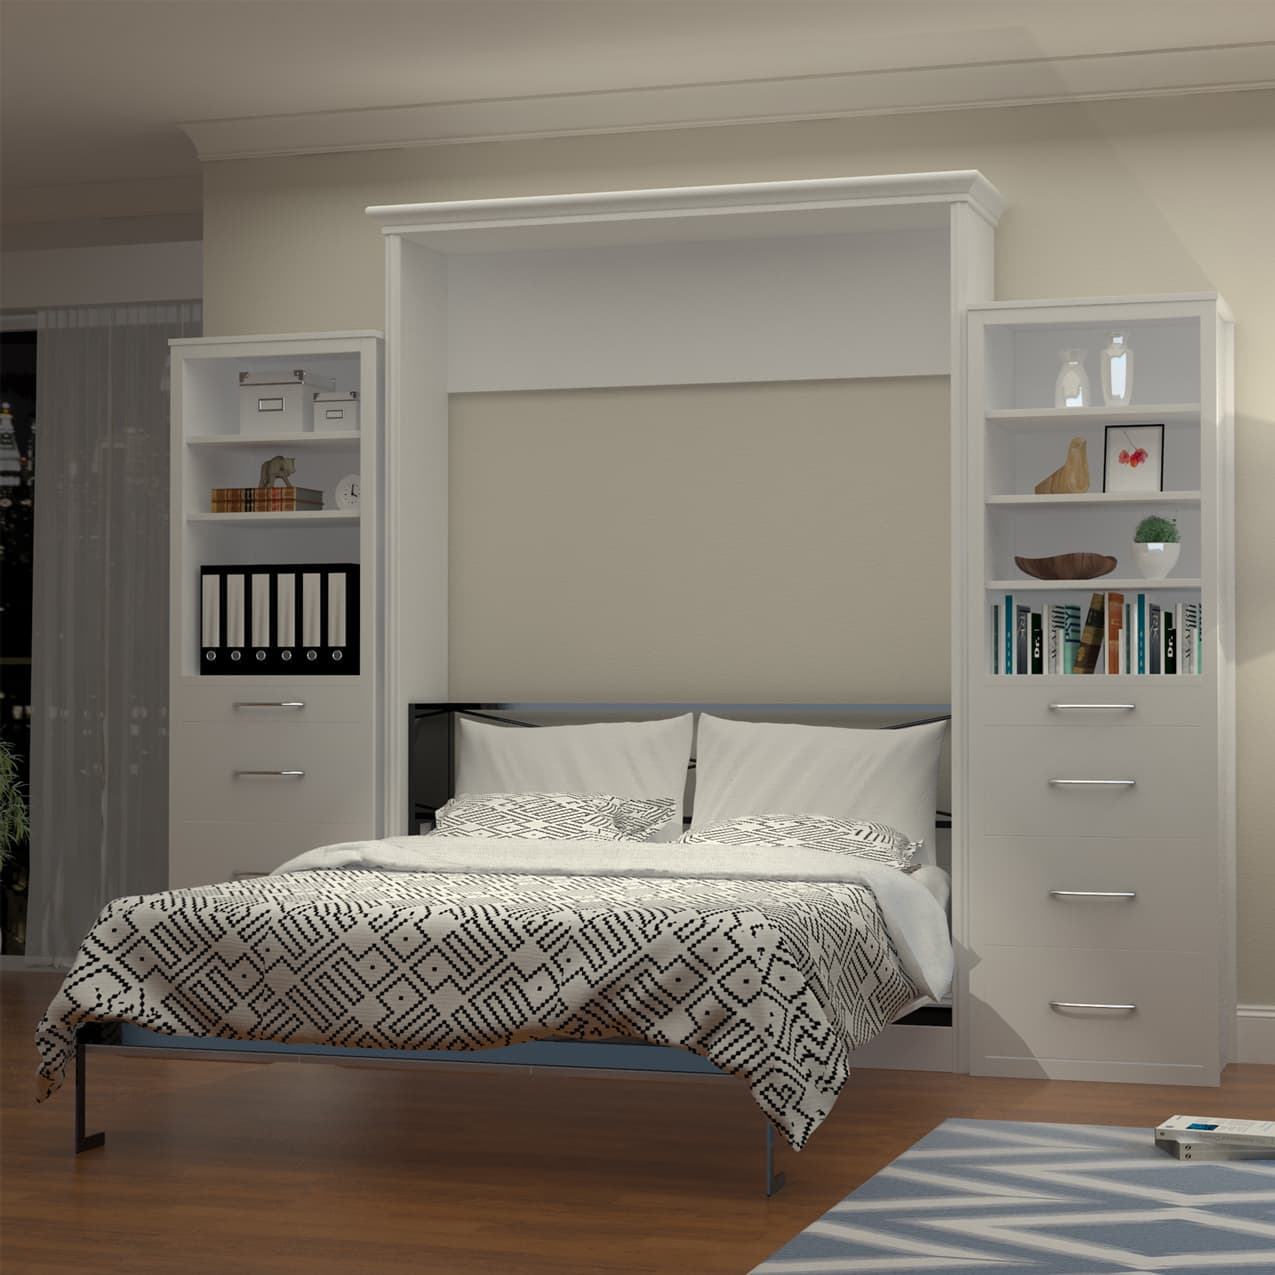 alegra quenn murphy bed with 2 storage cabinets bed open hidden hide away hide-a-way diy murphy bed kit wall bed cabinet fold out pull down